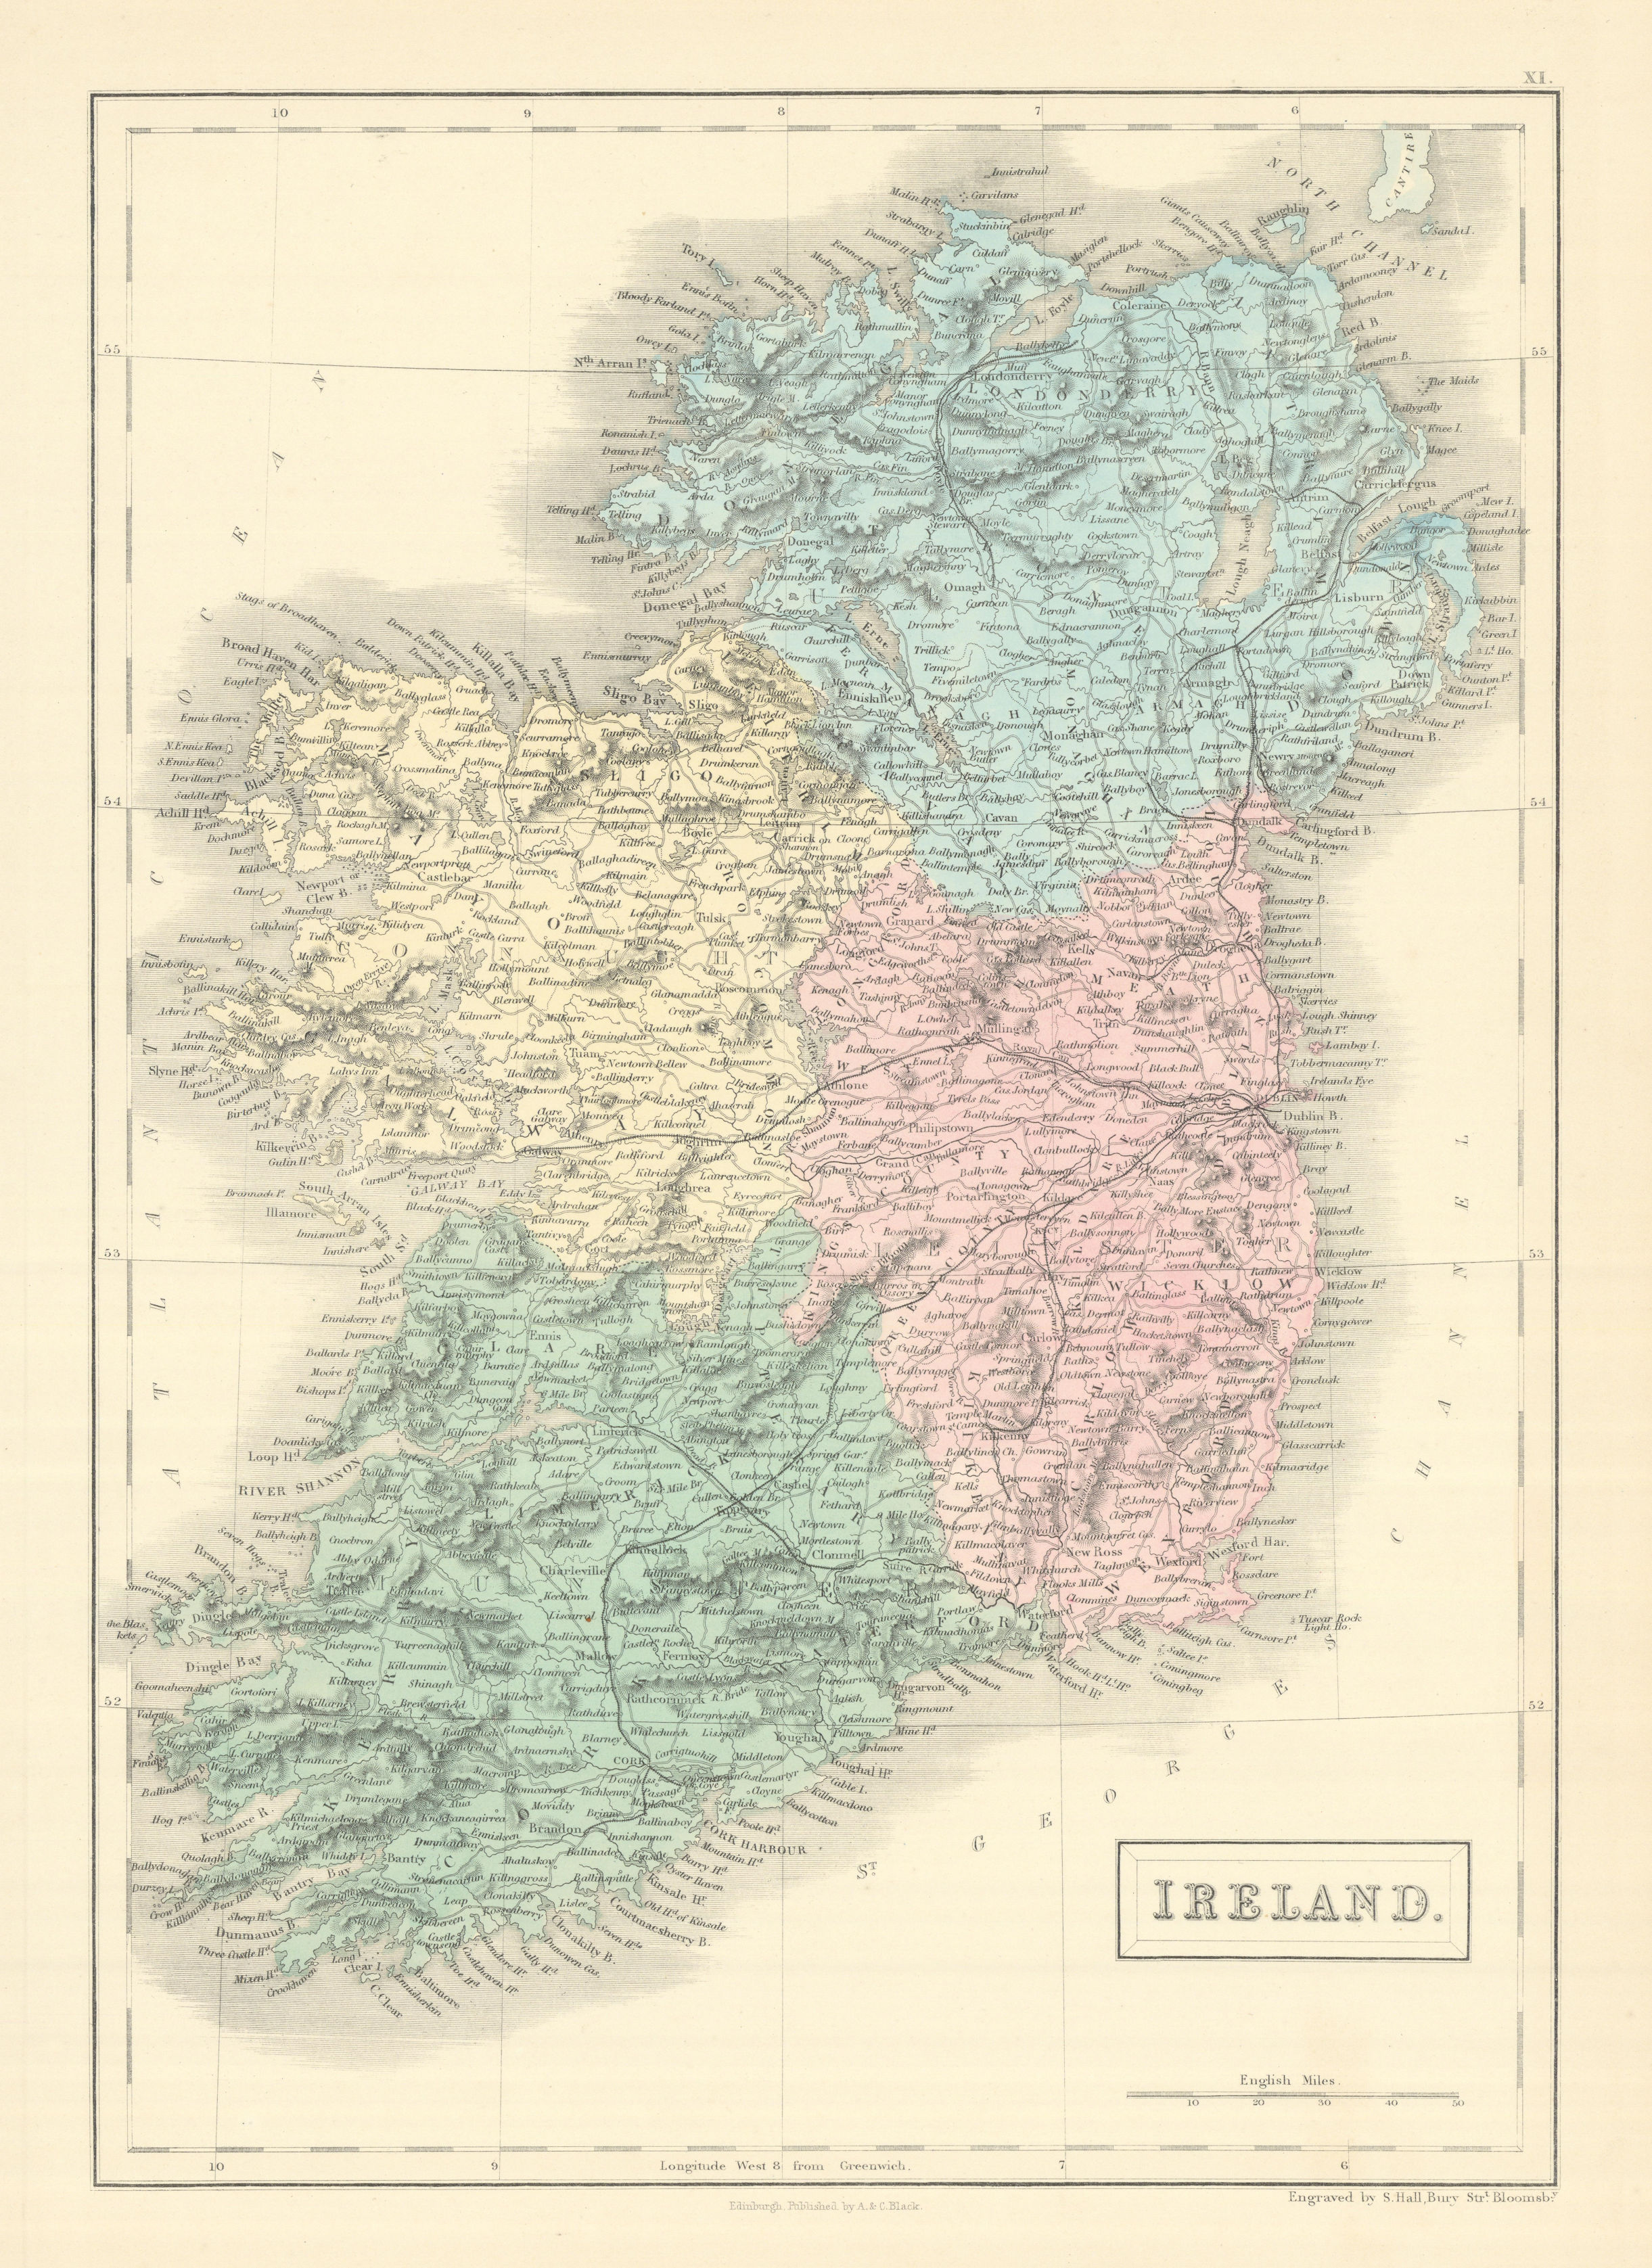 Associate Product Ireland showing provinces & railways by SIDNEY HALL 1854 old antique map chart